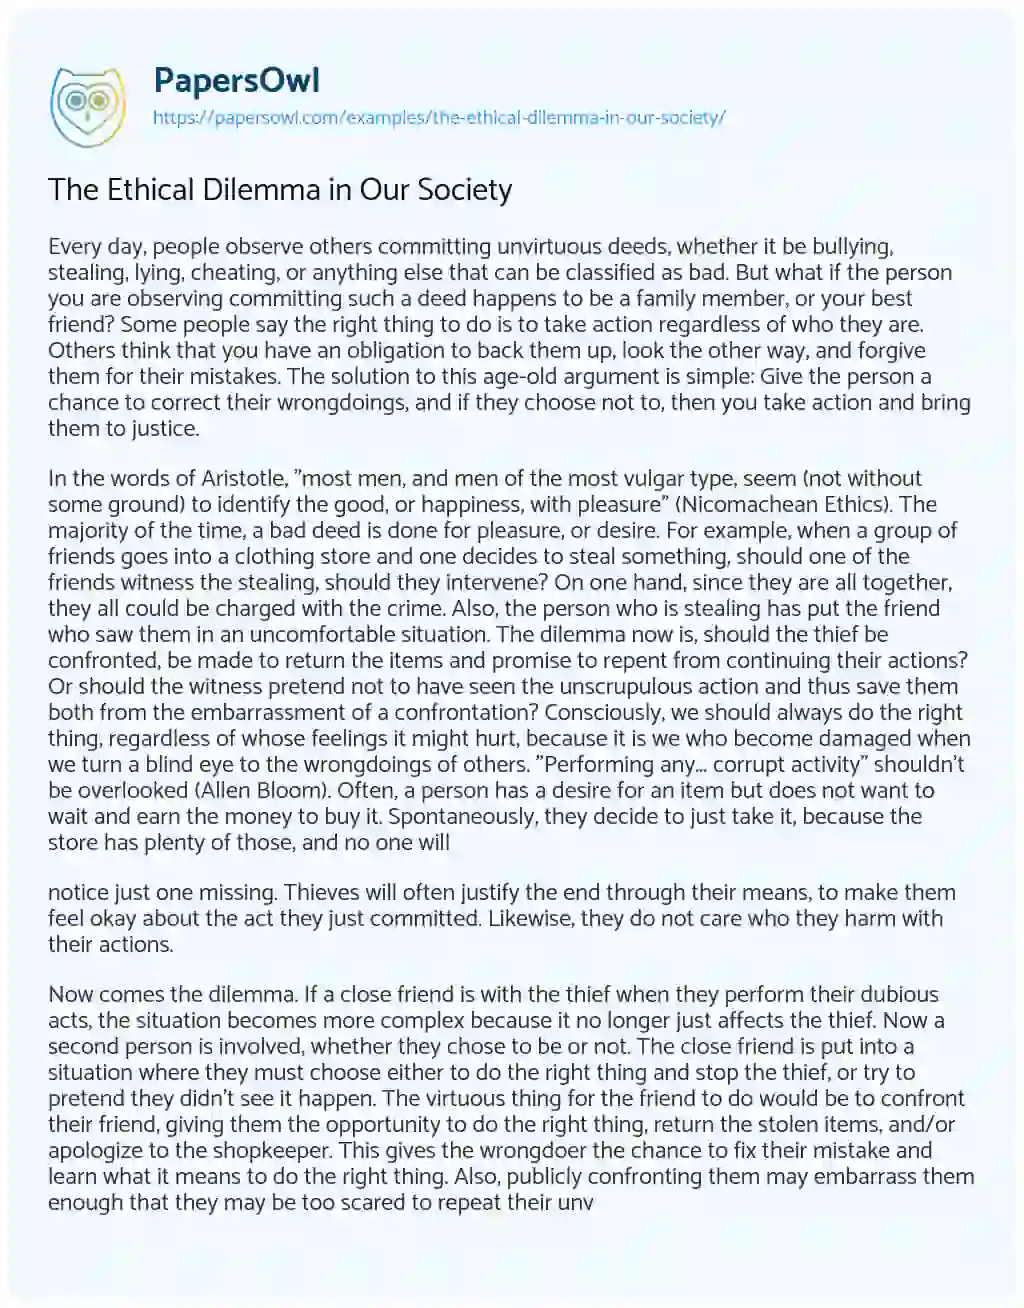 Essay on The Ethical Dilemma in our Society